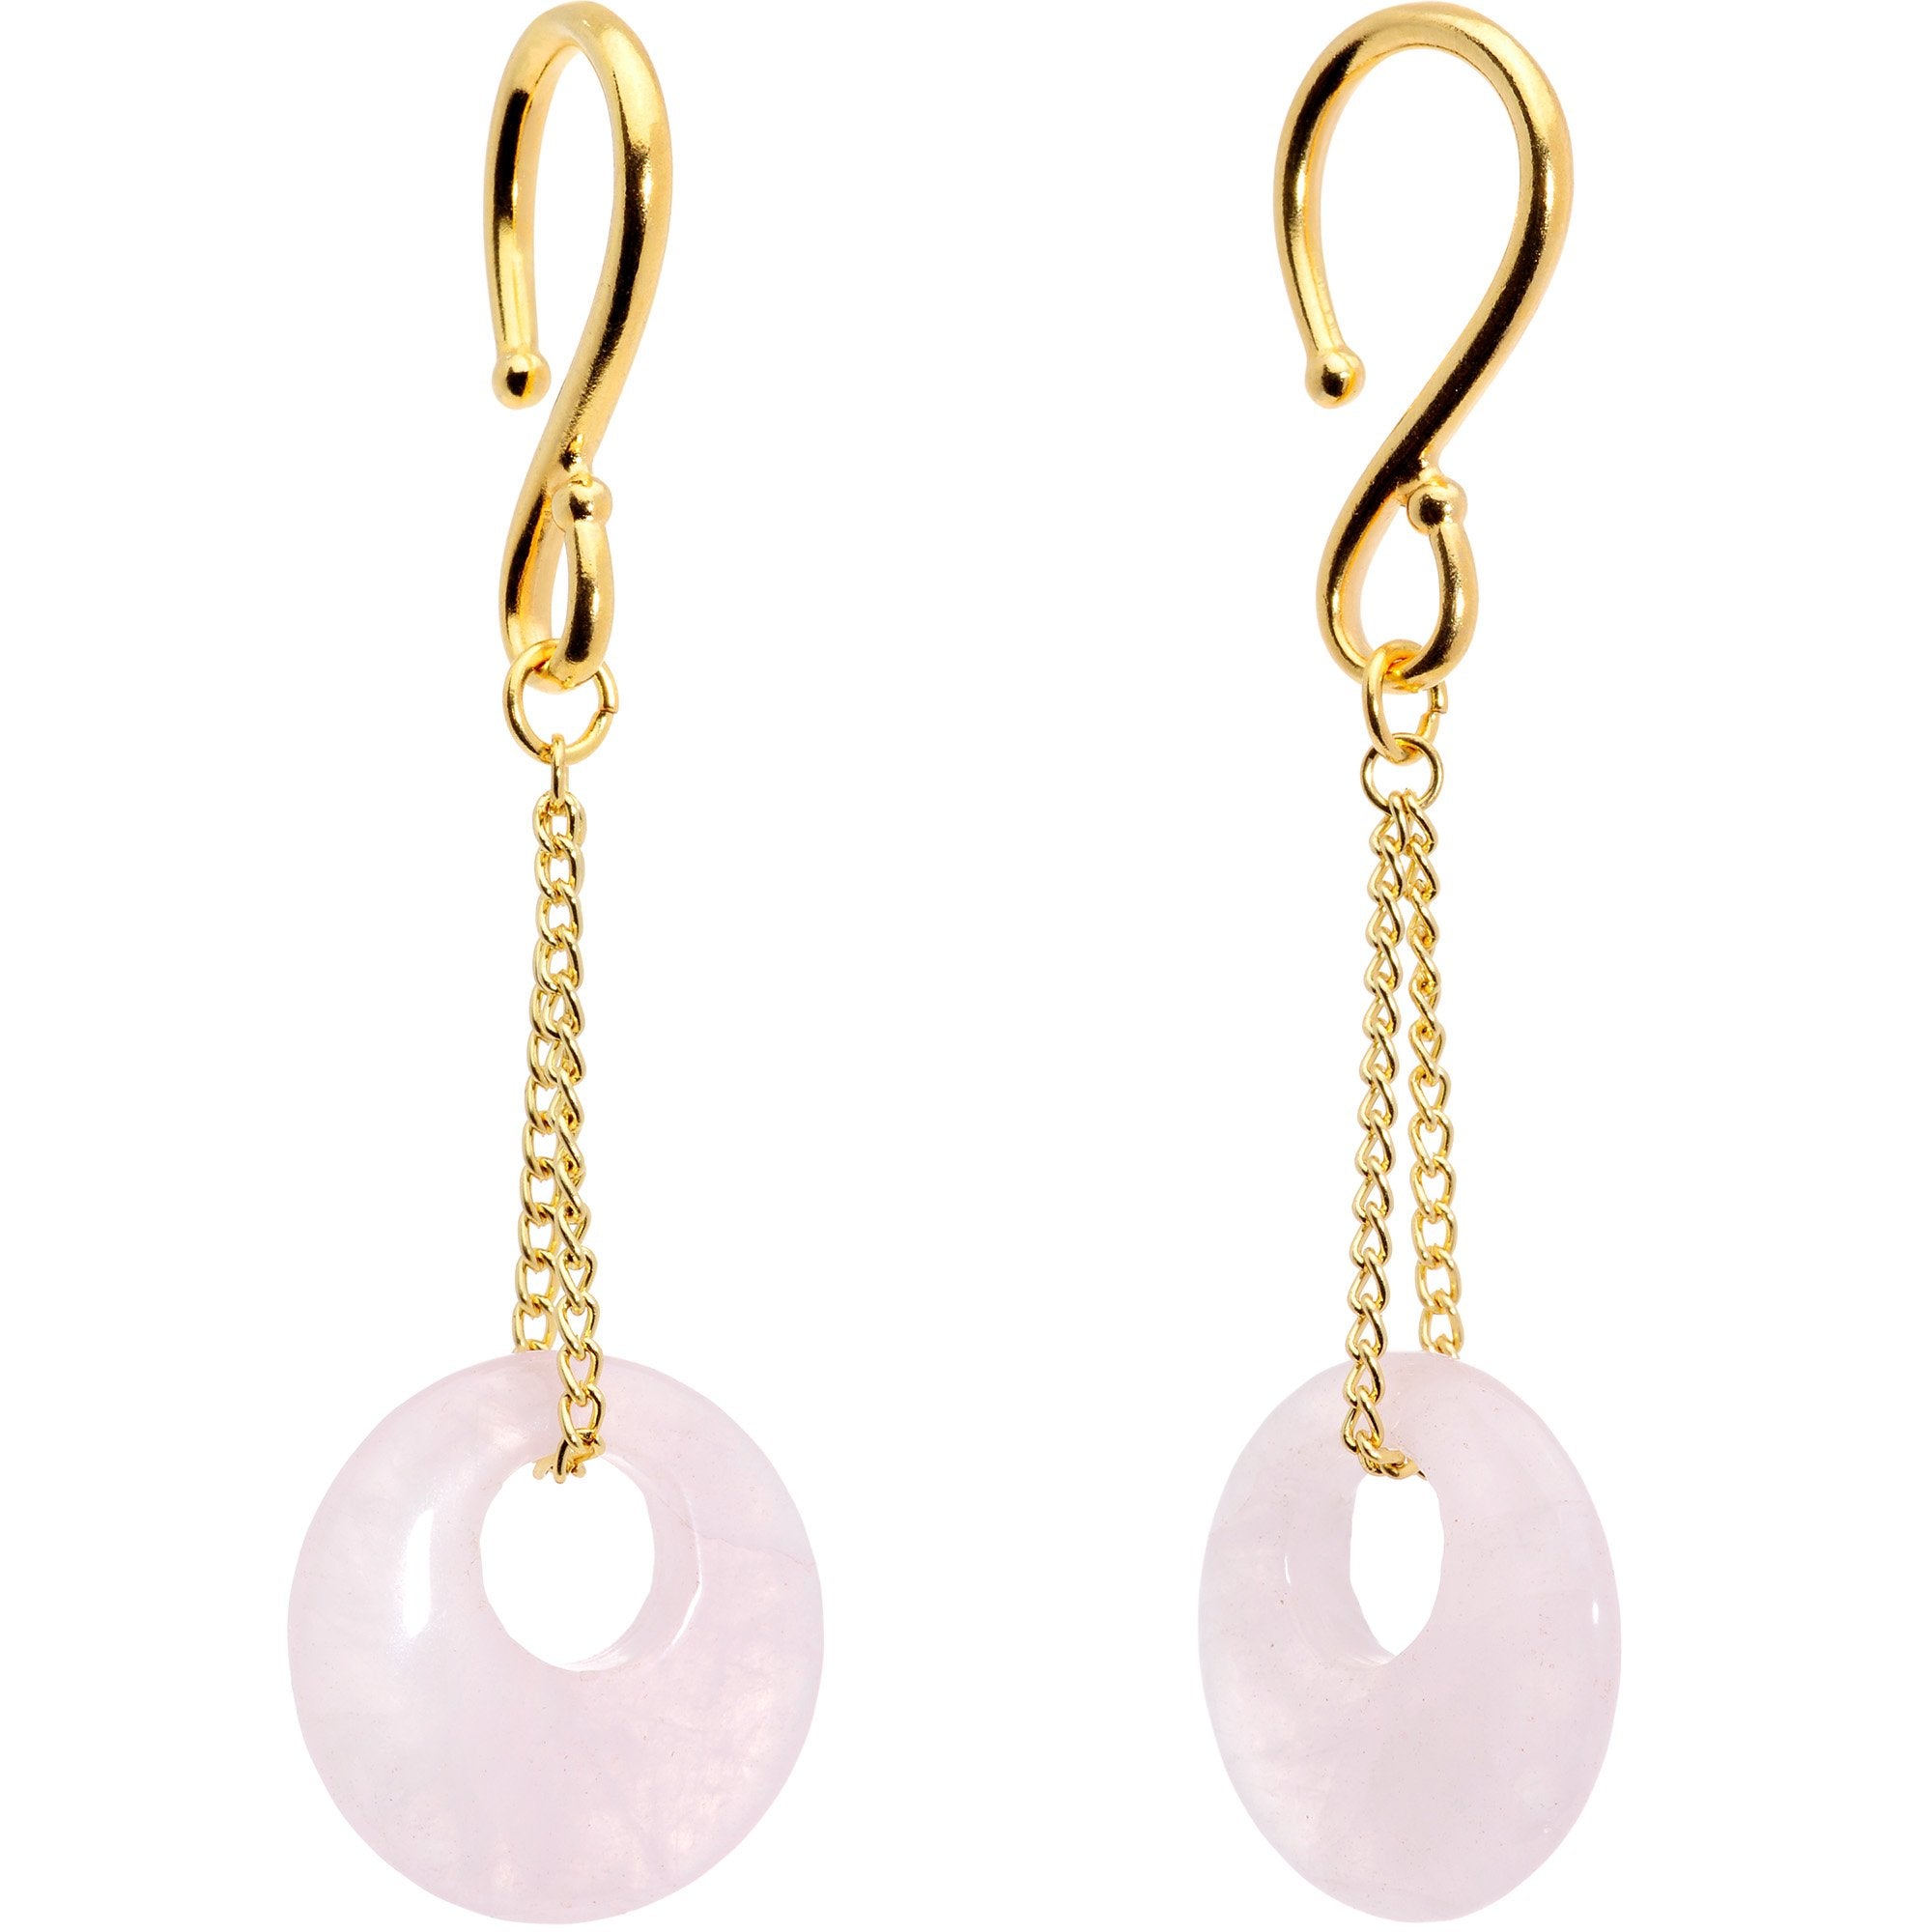 Handcrafted Gold Tone Pink Rose Flower Quartz Donut Chain Ear Weights